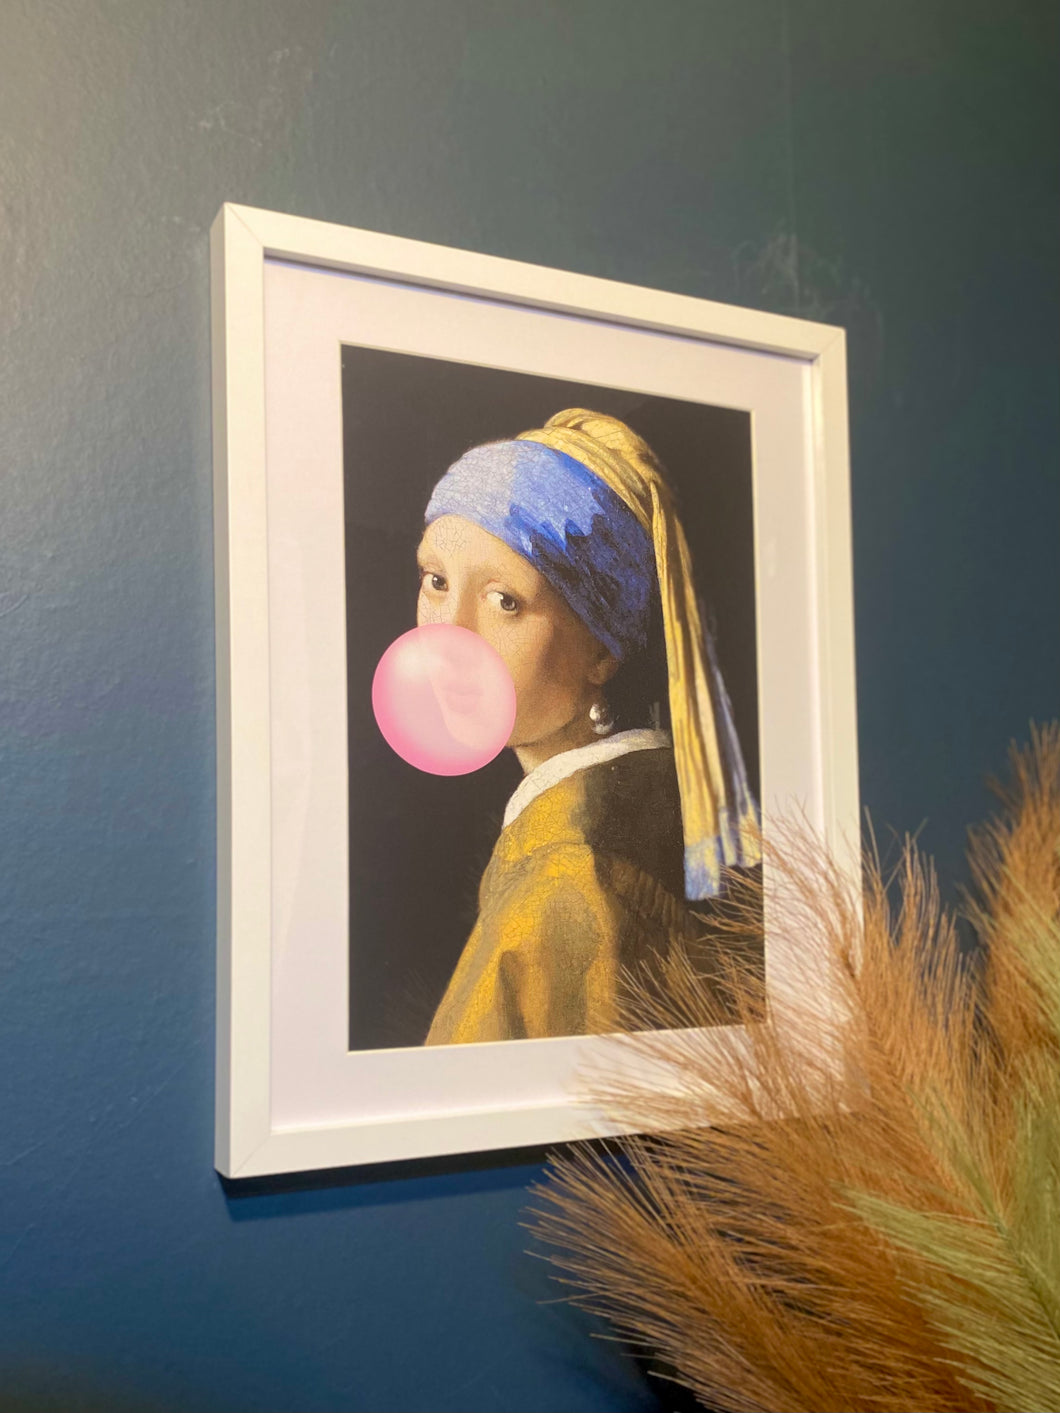 The Girl Blowing Bubblegum framed Print - 2 Sizes